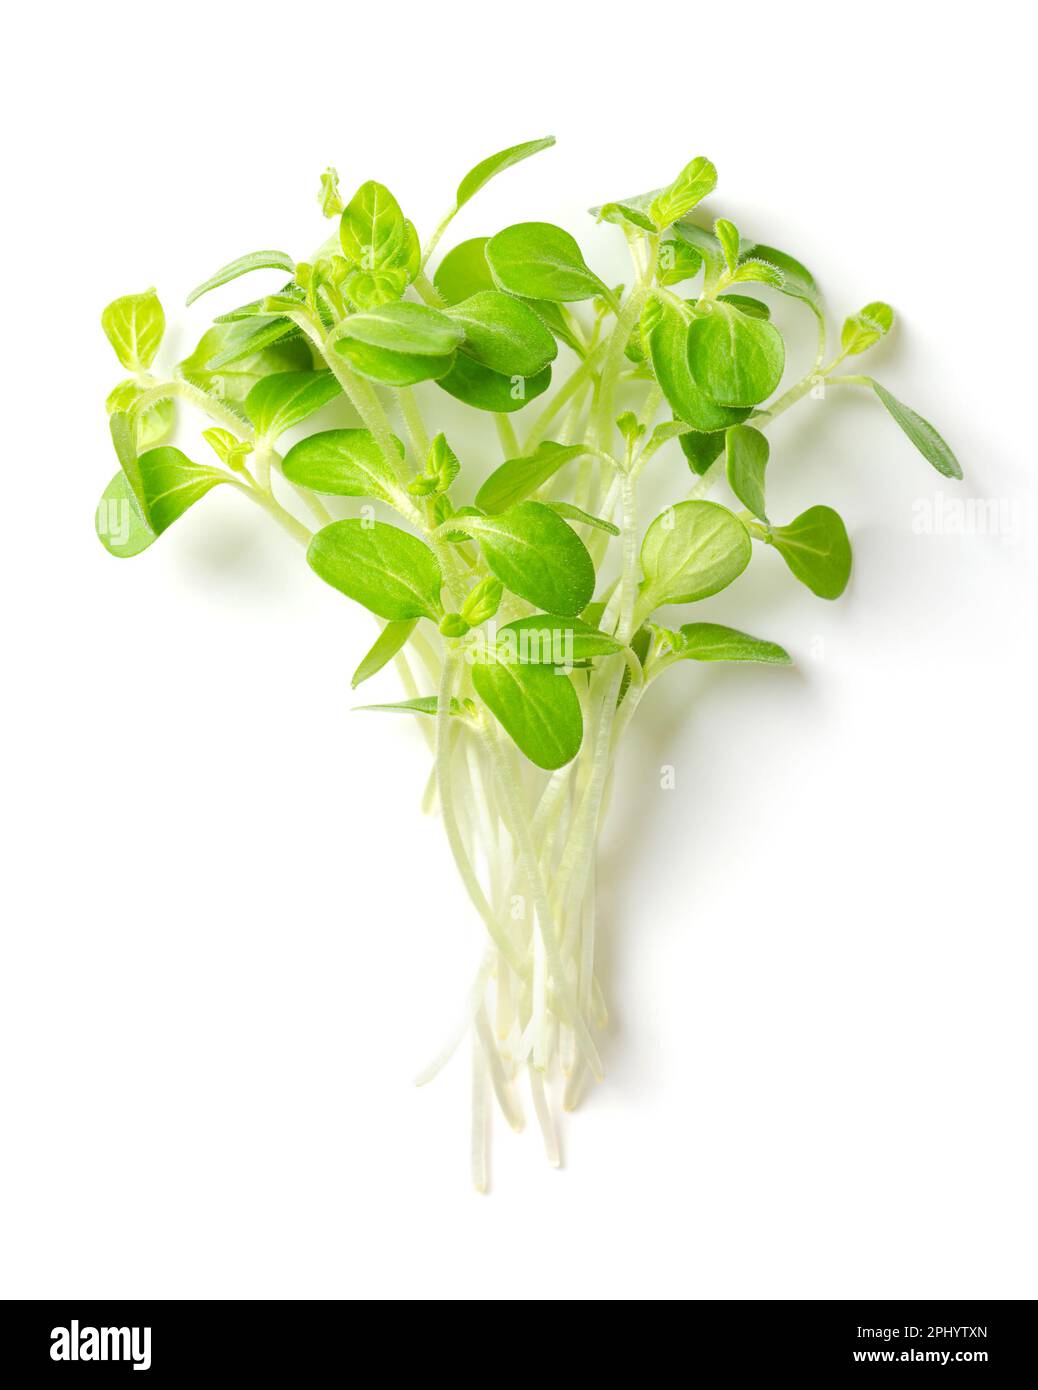 Bunch of sesame microgreens from above. Ready to eat, fresh, green, young plants of Sesamum, also known as benne. Seedlings and cotyledons. Stock Photo